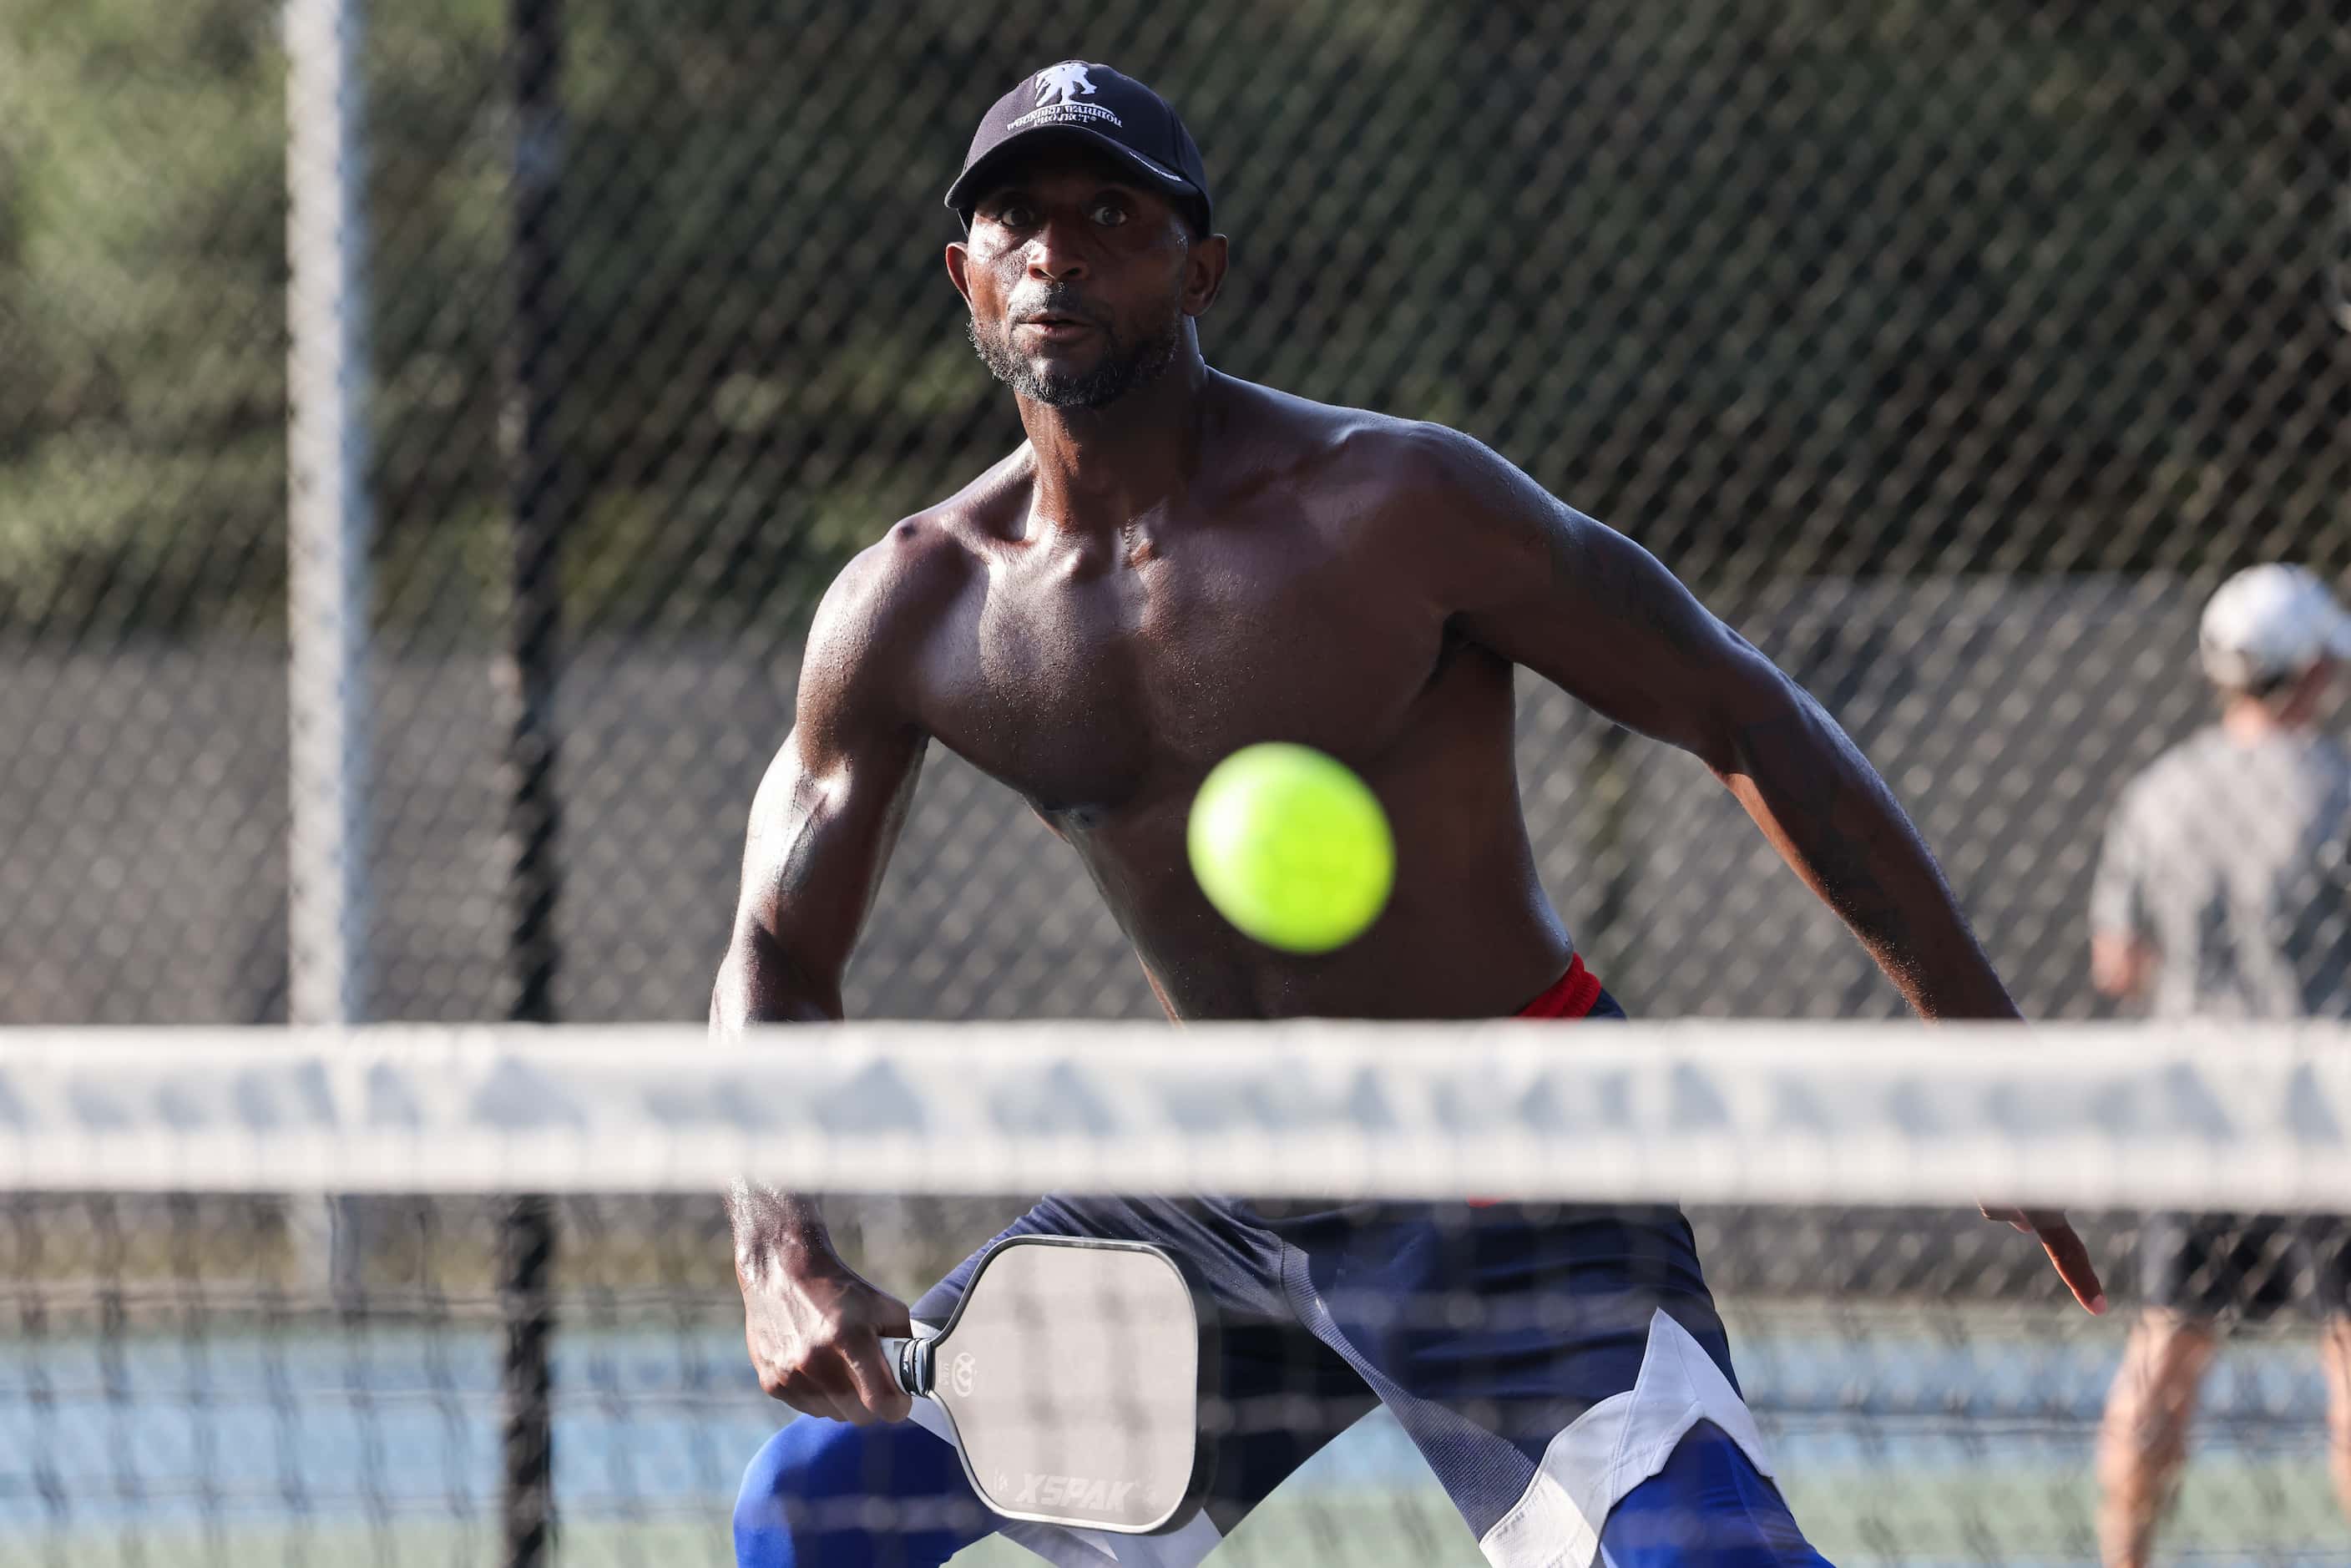 Kirk Wilson watches the ball during a doubles game of pickleball at Dallas' Cole Park. 